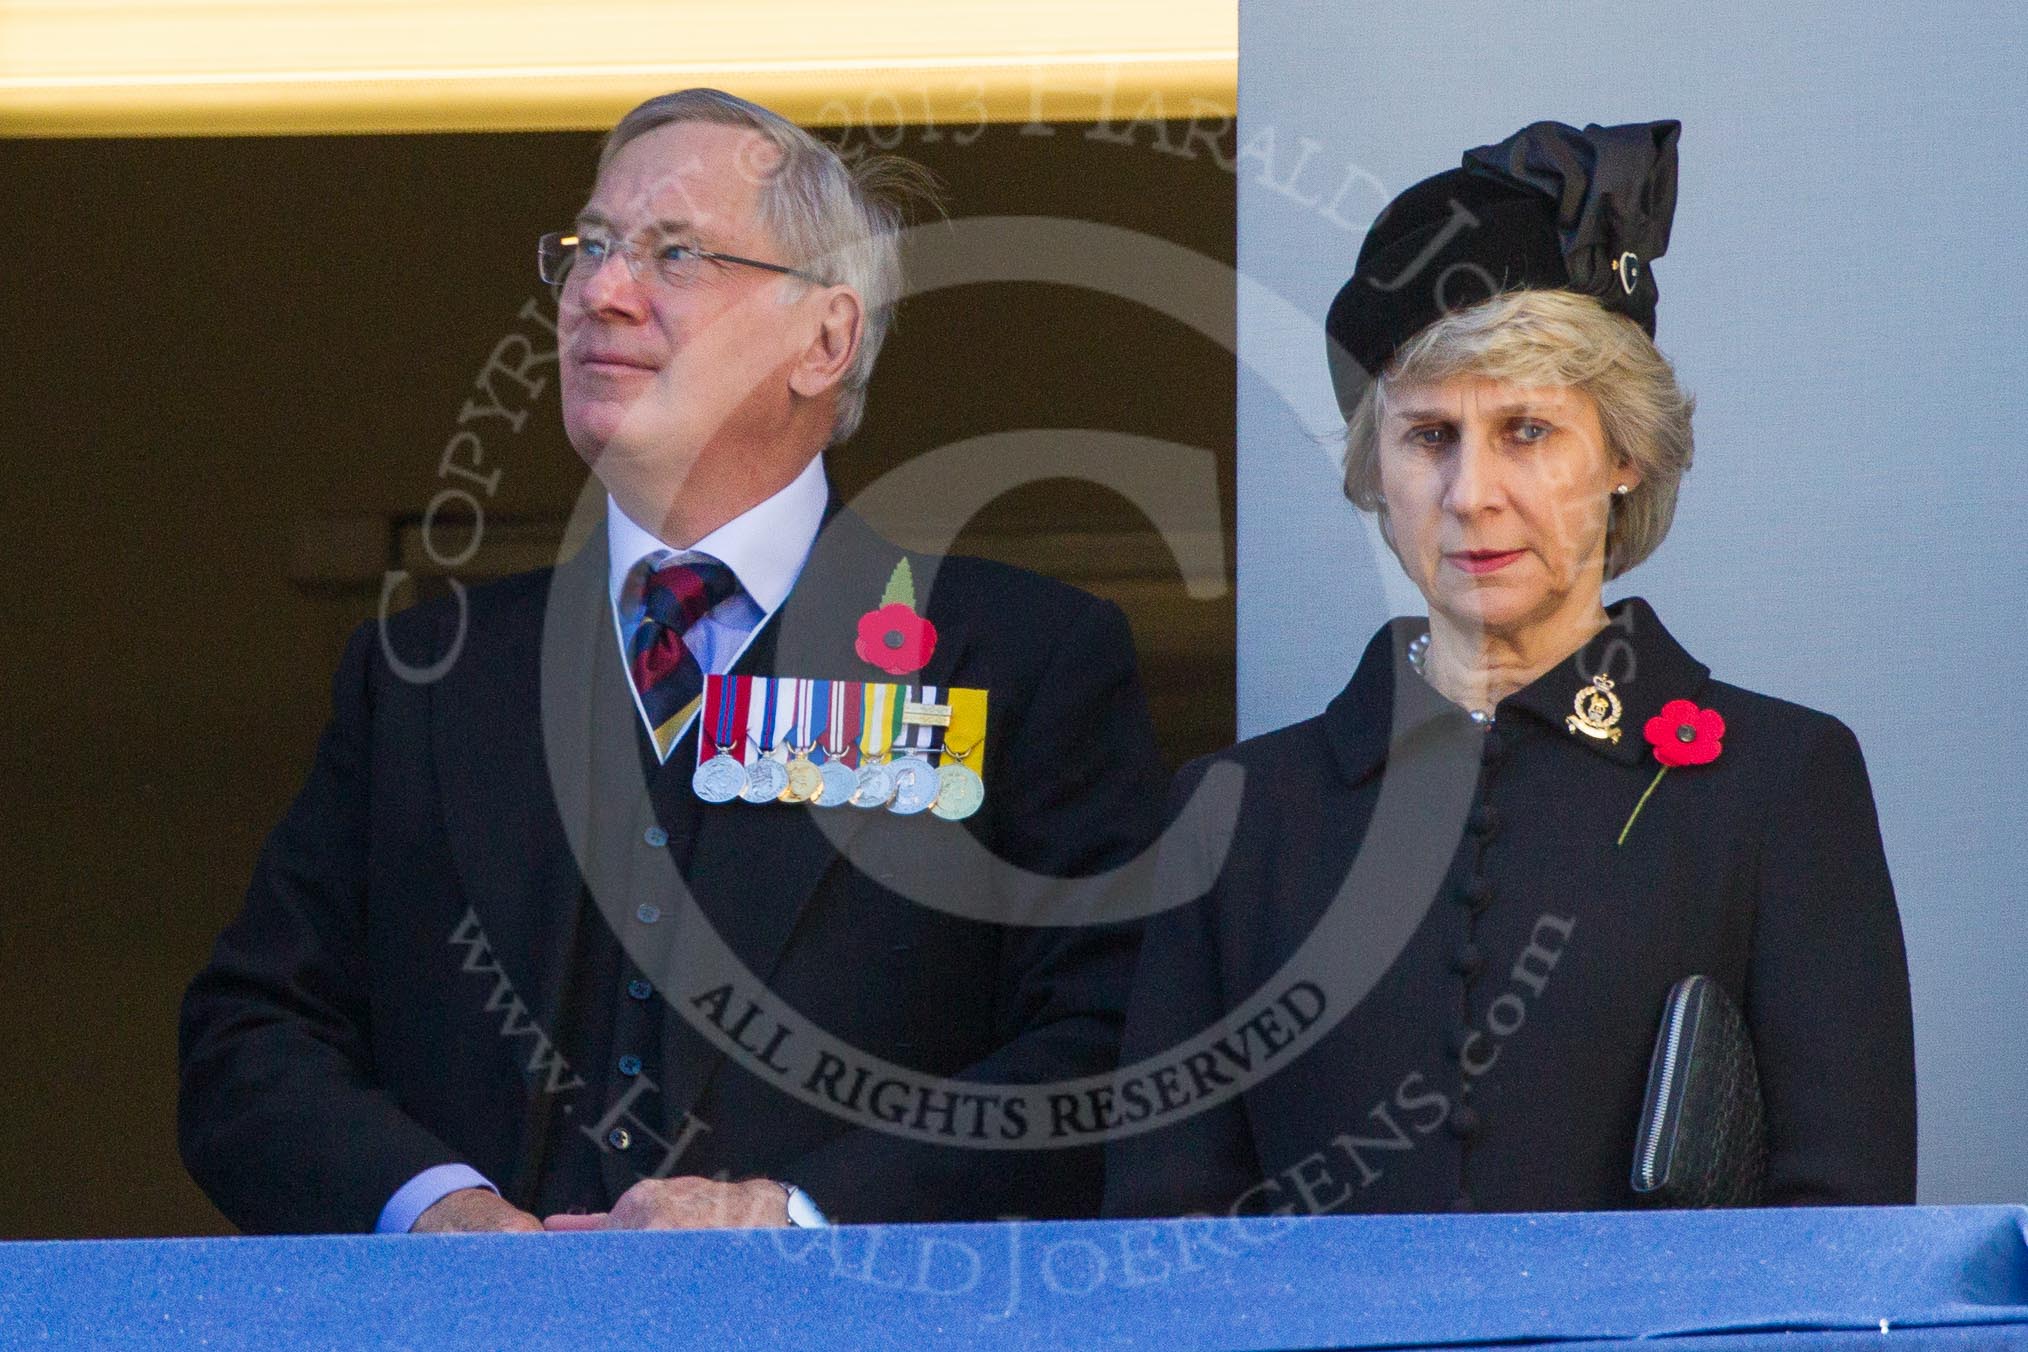 THR The Duke and Duchess of Gloucester on one of the balconies of the Foreign- and Commonwealth Office building.